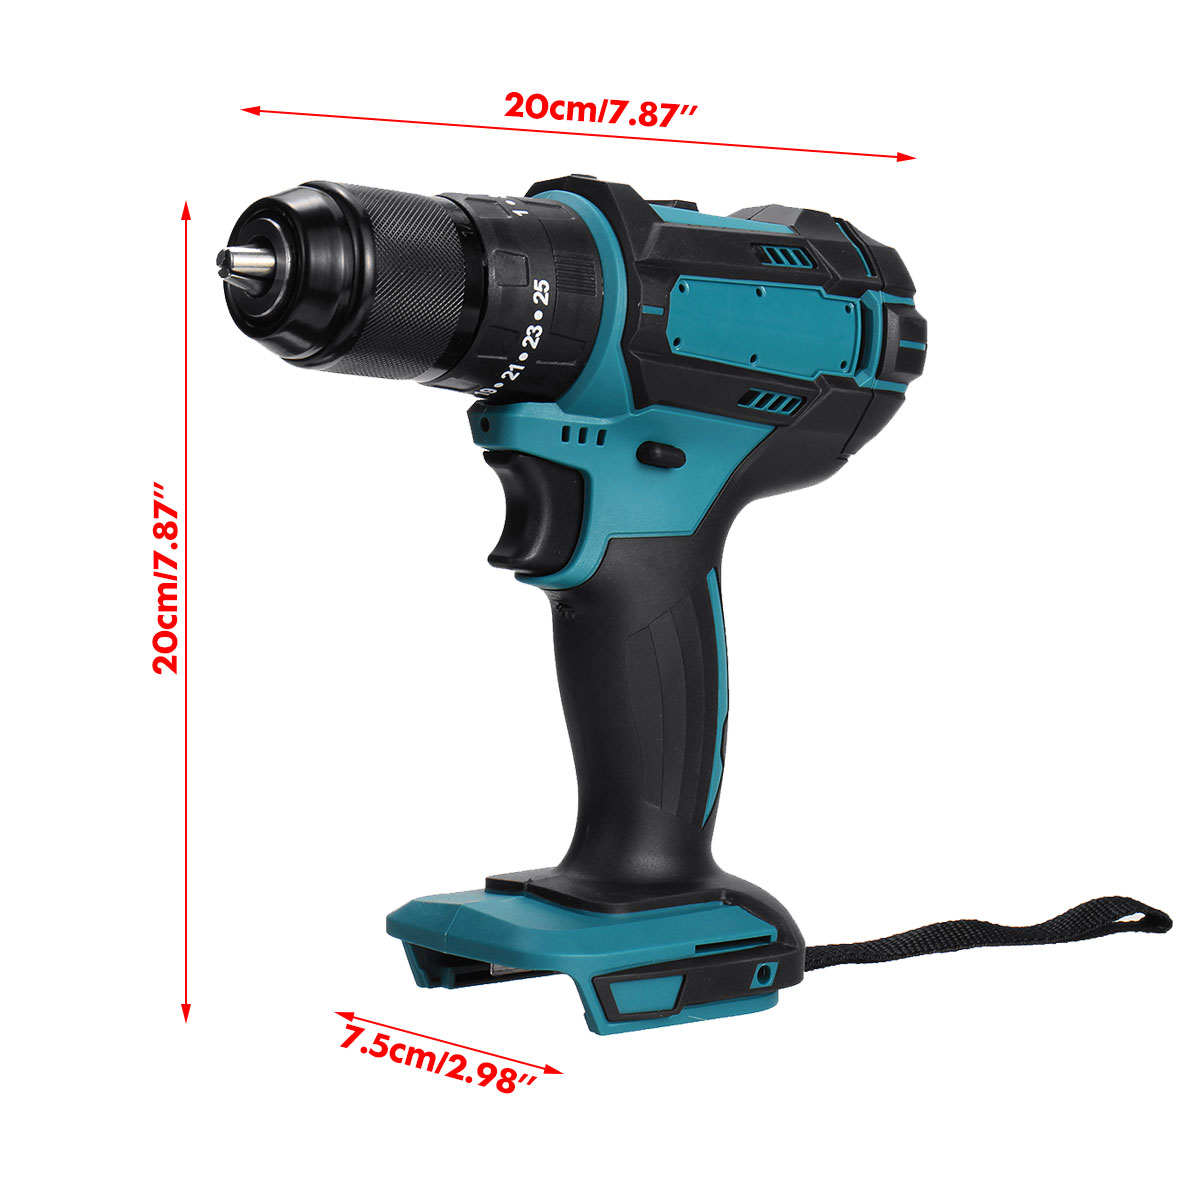 13mm-800W-Cordless-Brushless-Impact-Drill-Driver-253-Torque-Electric-Drill-Screwdriver-For-Makita-18-1880979-12